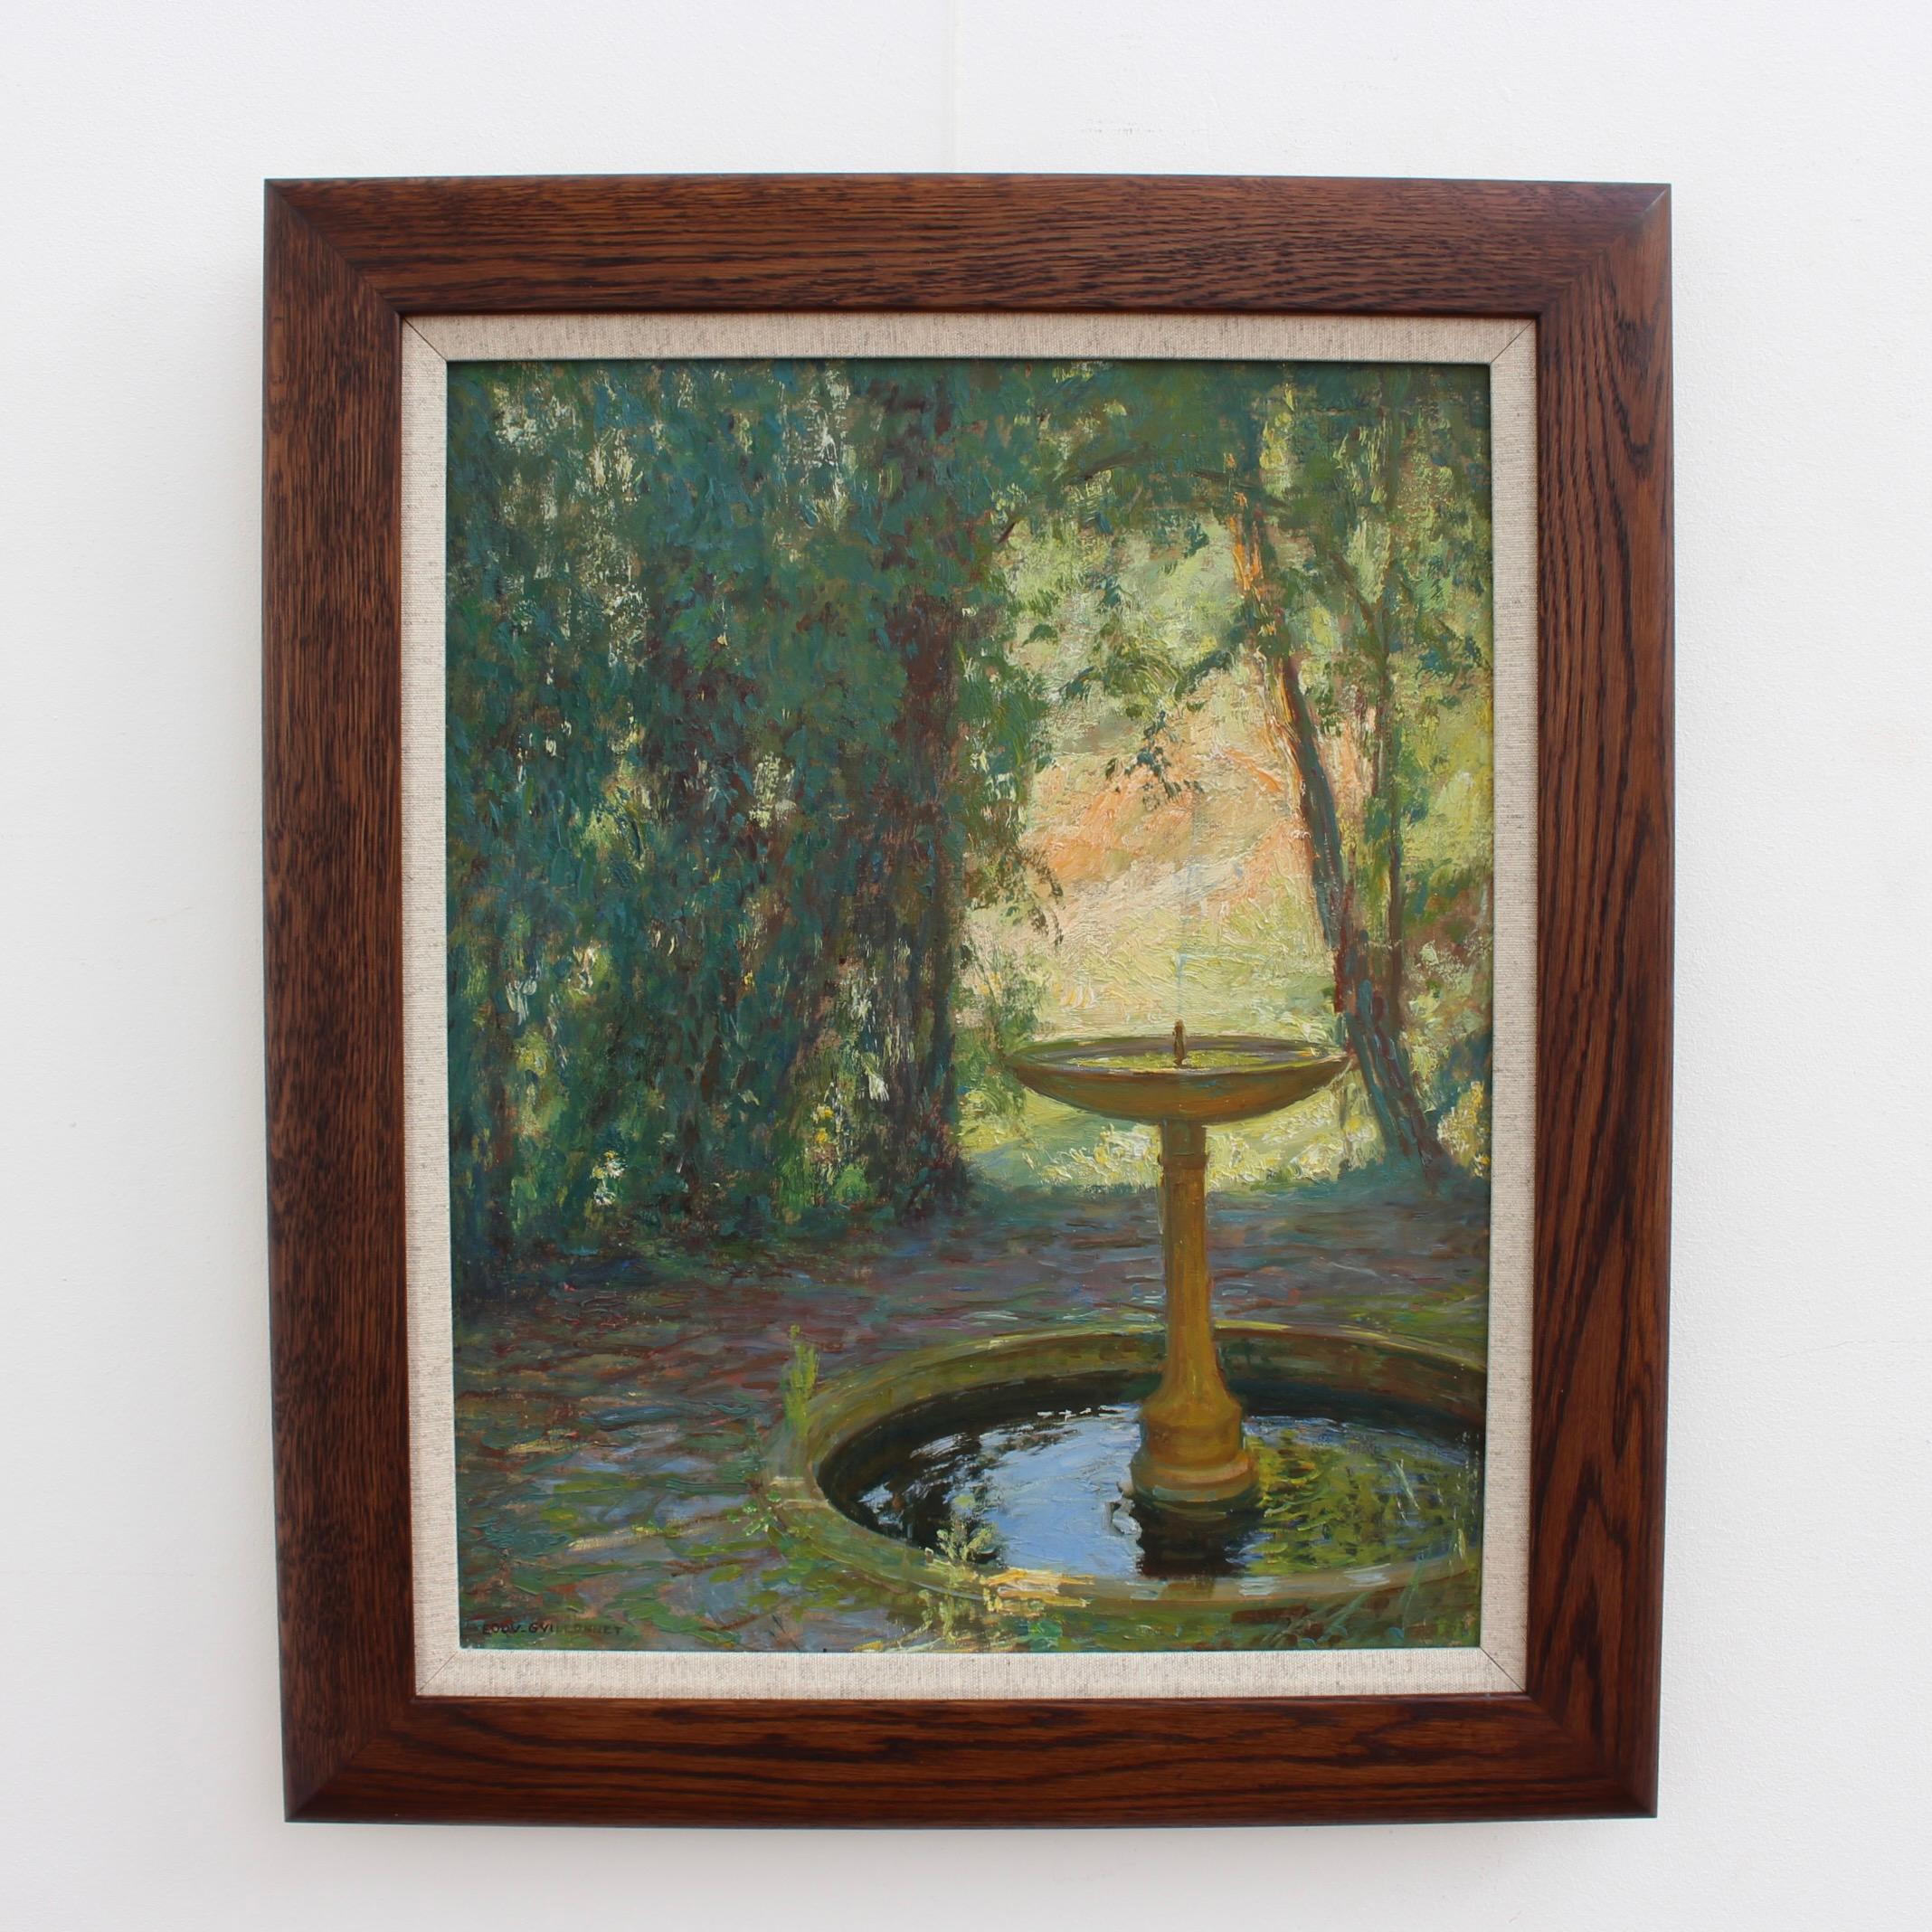 Fountain in a Park - Painting by Octave-Denis-Victor Guillonnet